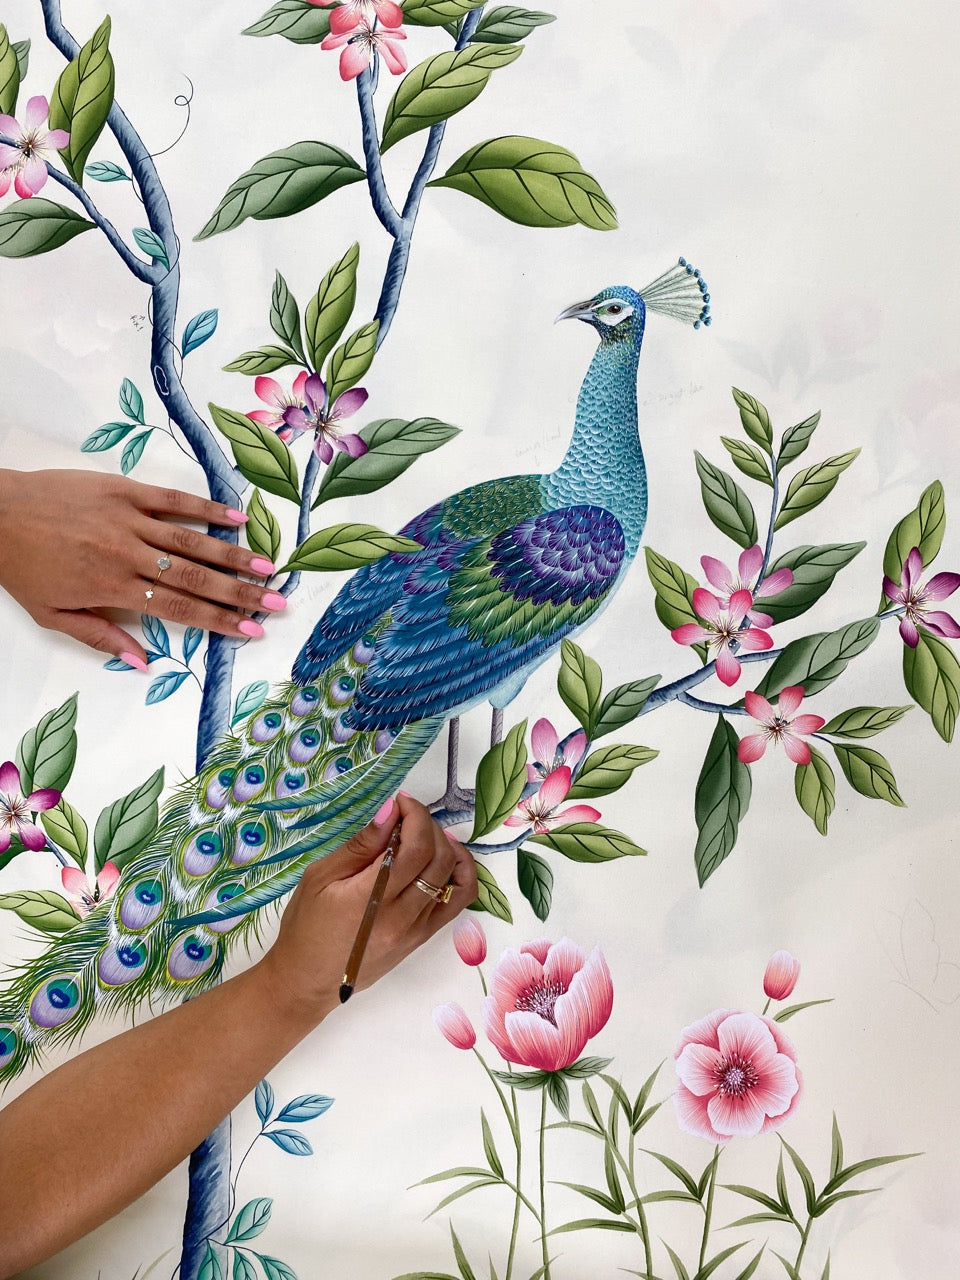 Diane Hill hand painting a chinoiserie peacock and floral design onto silk paper